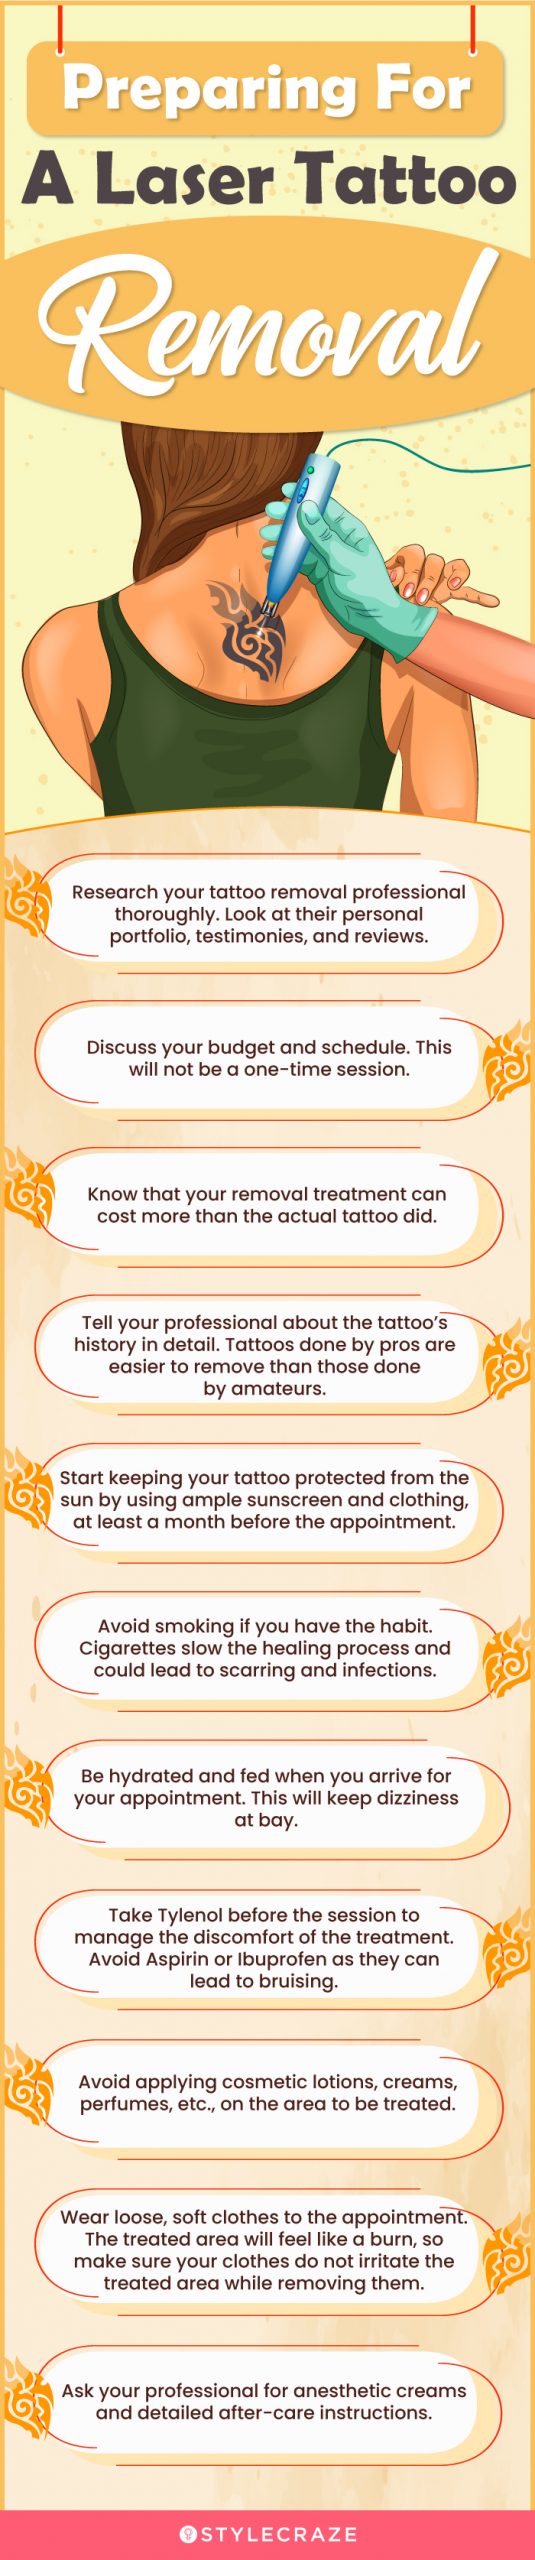 preparing for a laser tattoo removal (infographic)